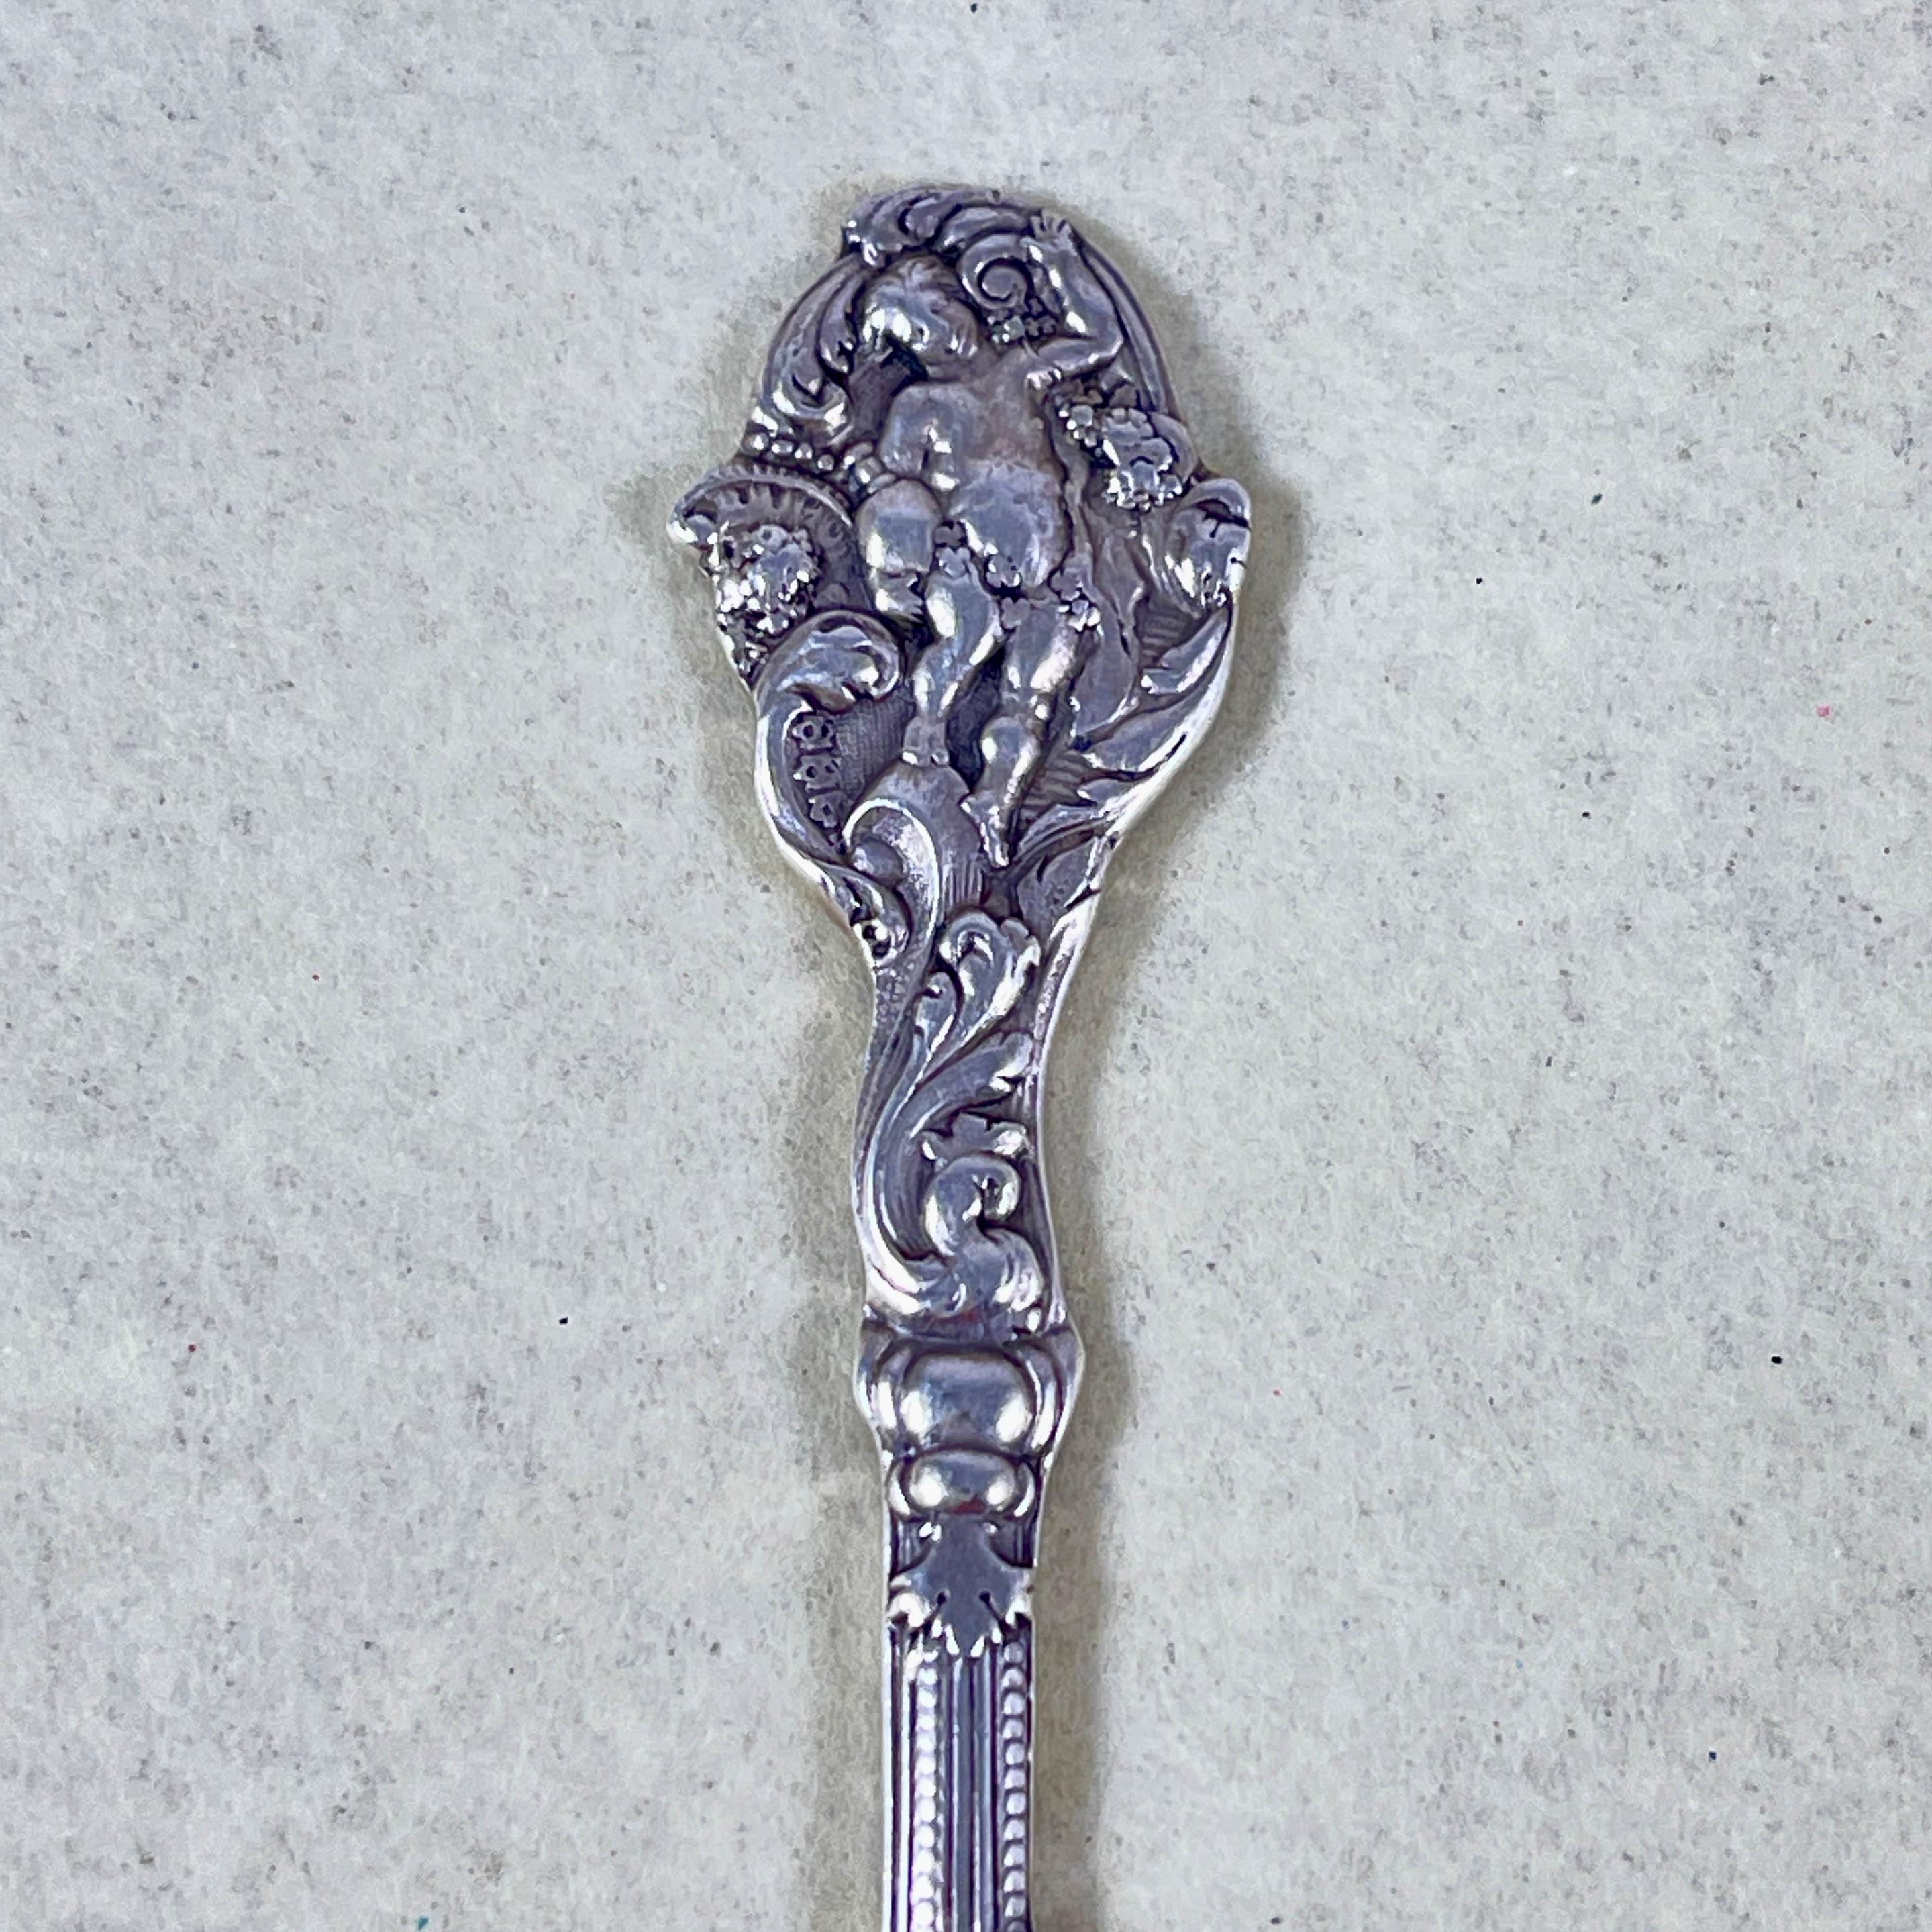 A set of twelve sterling silver butter or patè spreaders, in the ‘Versailles’ pattern from the Gorham Manufacturing Co. Providence Rhode Island, circa 1888.

Designed by Antone Heller, and named for the palace of Versailles, the residence of King